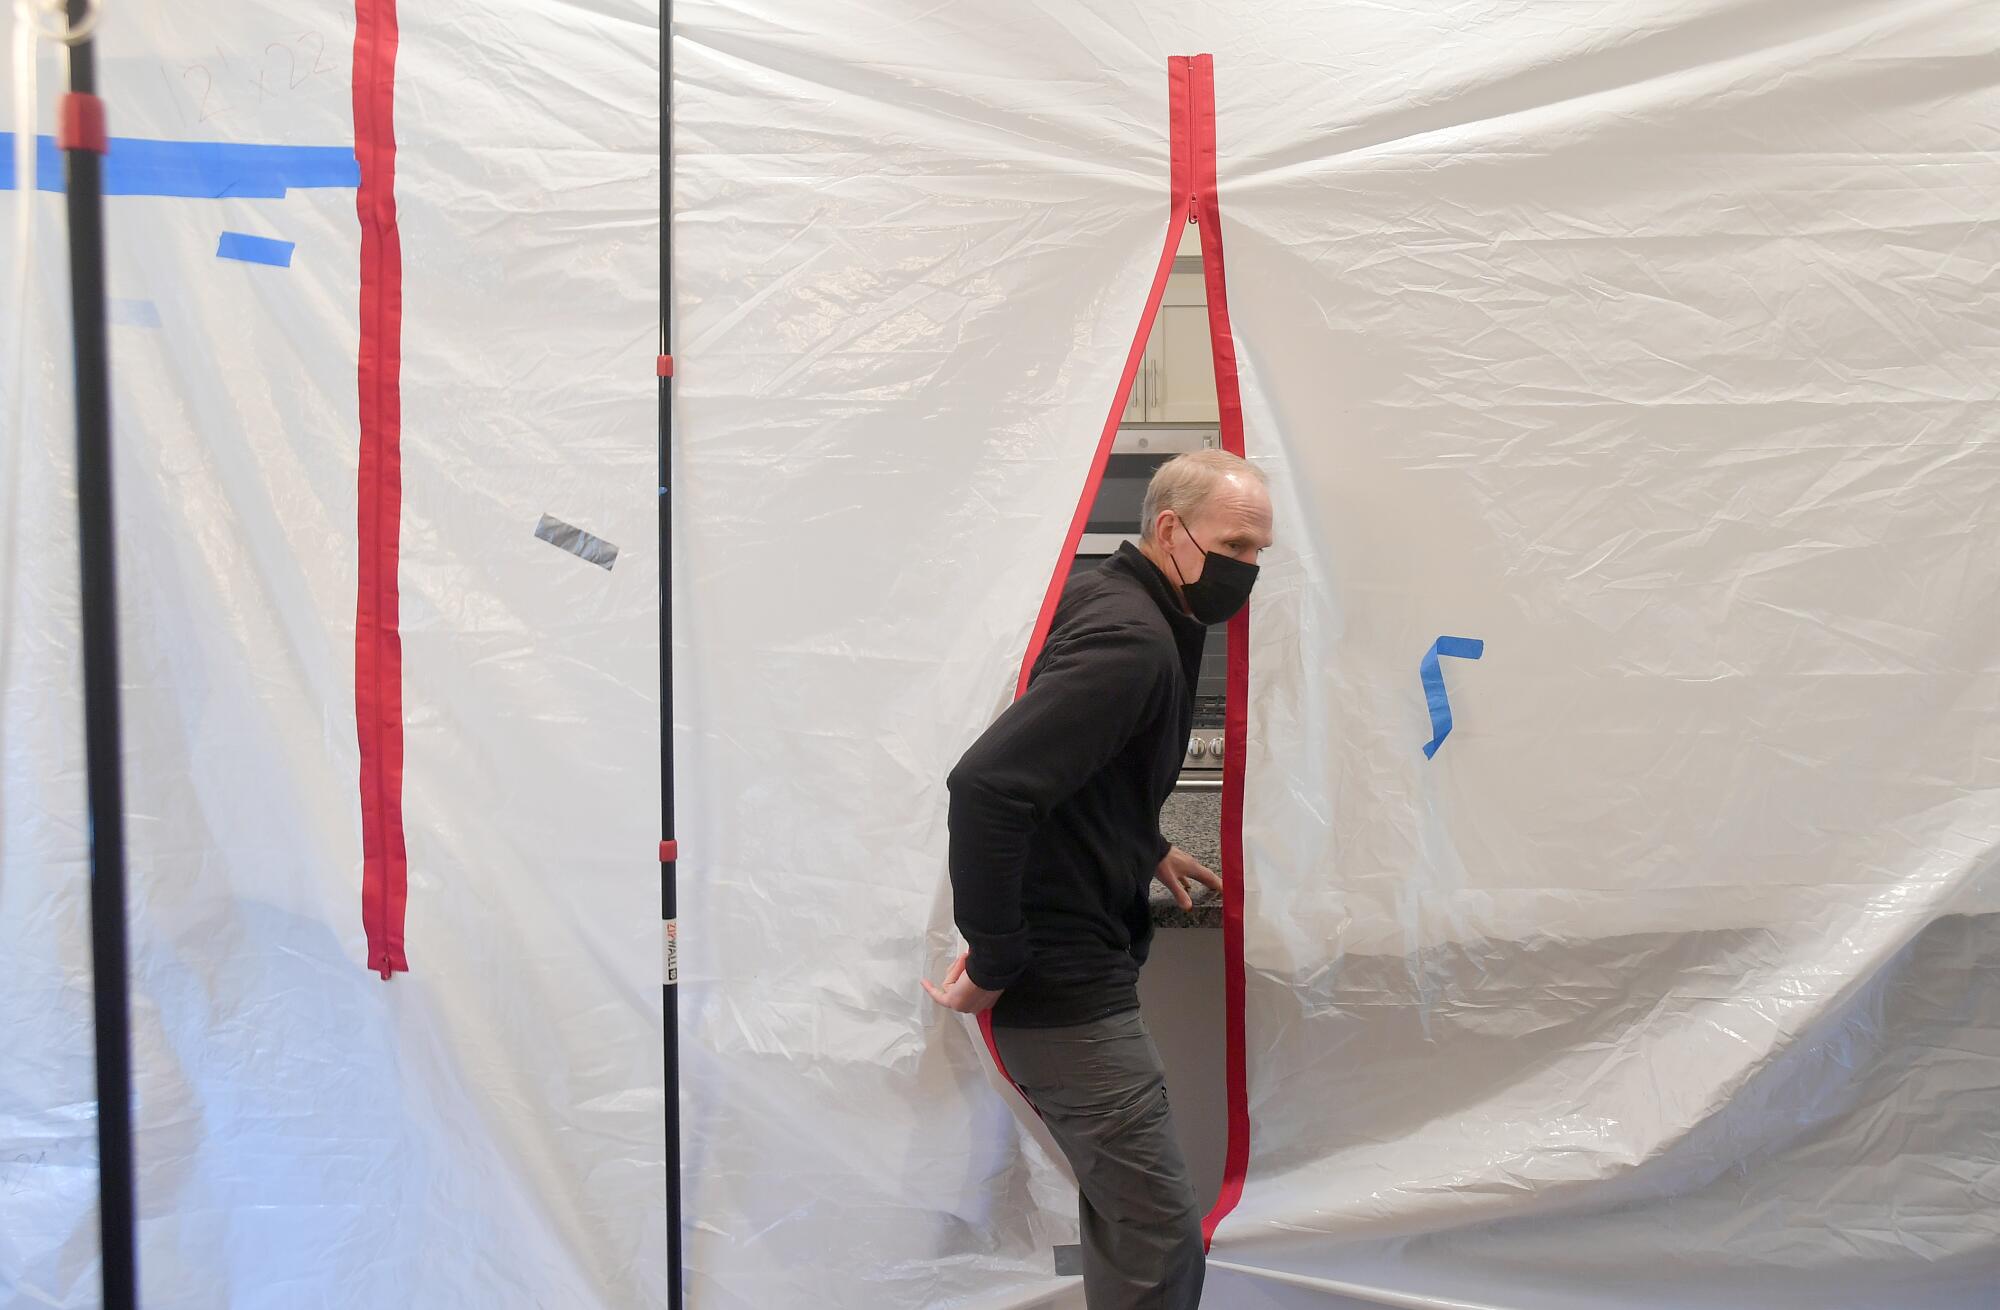 Rob Jackson steps out of a testing area protected by plastic sheeting.